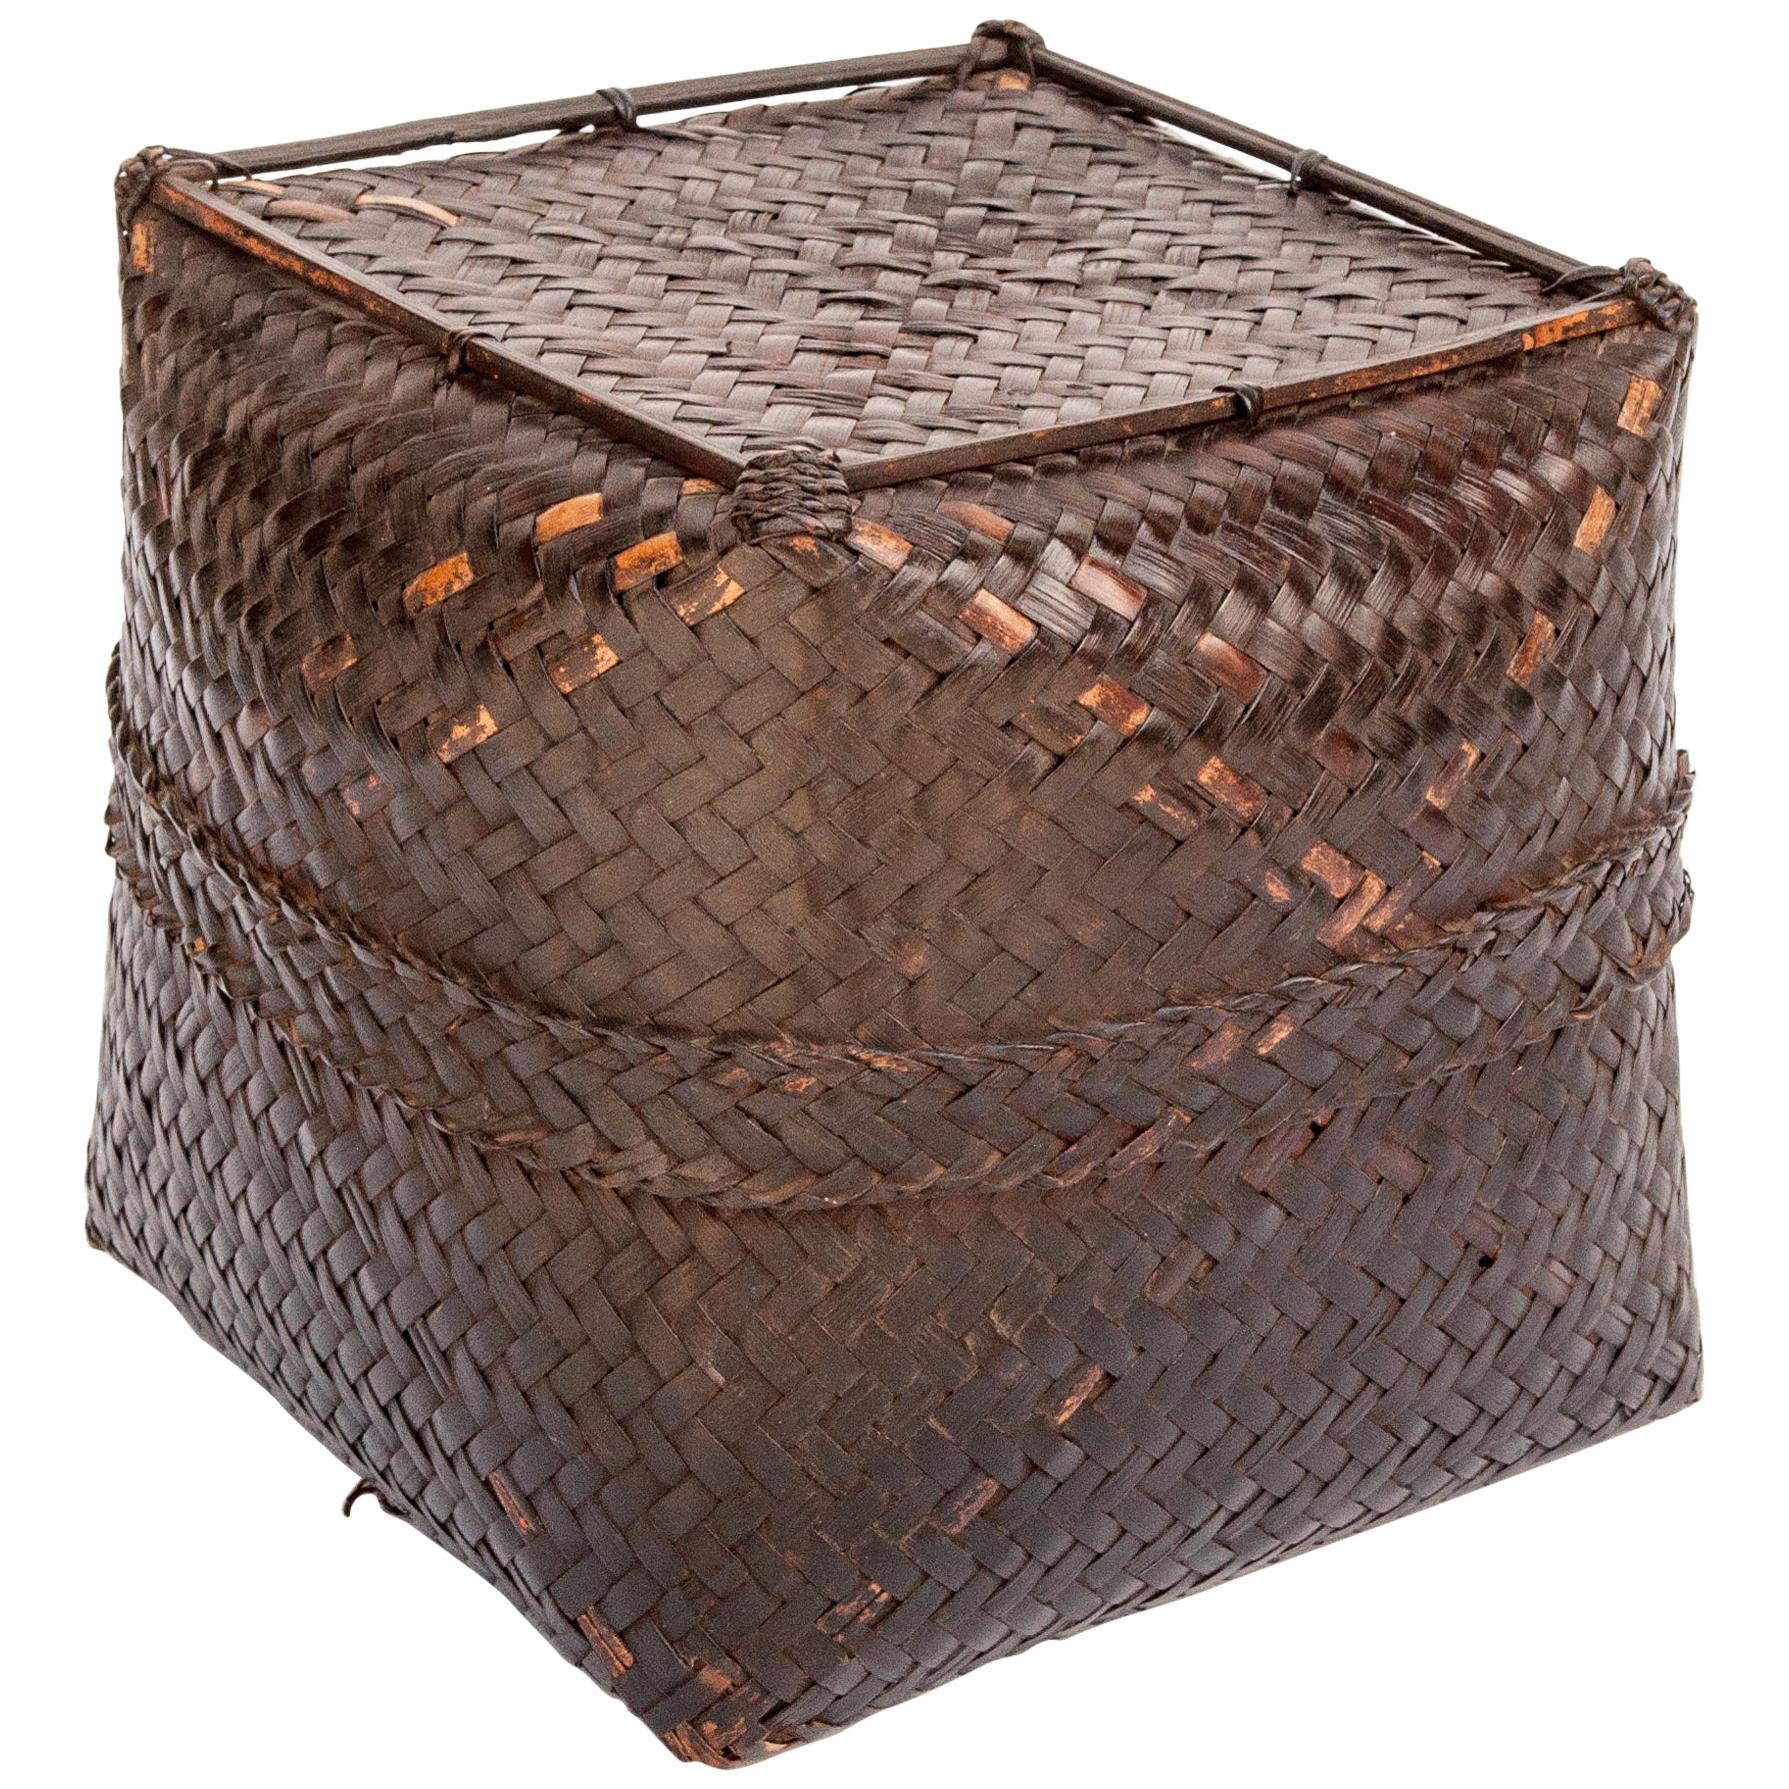 Vintage Bamboo Storage Basket with Lid Lombok, Indonesia, Mid-Late 20th Century